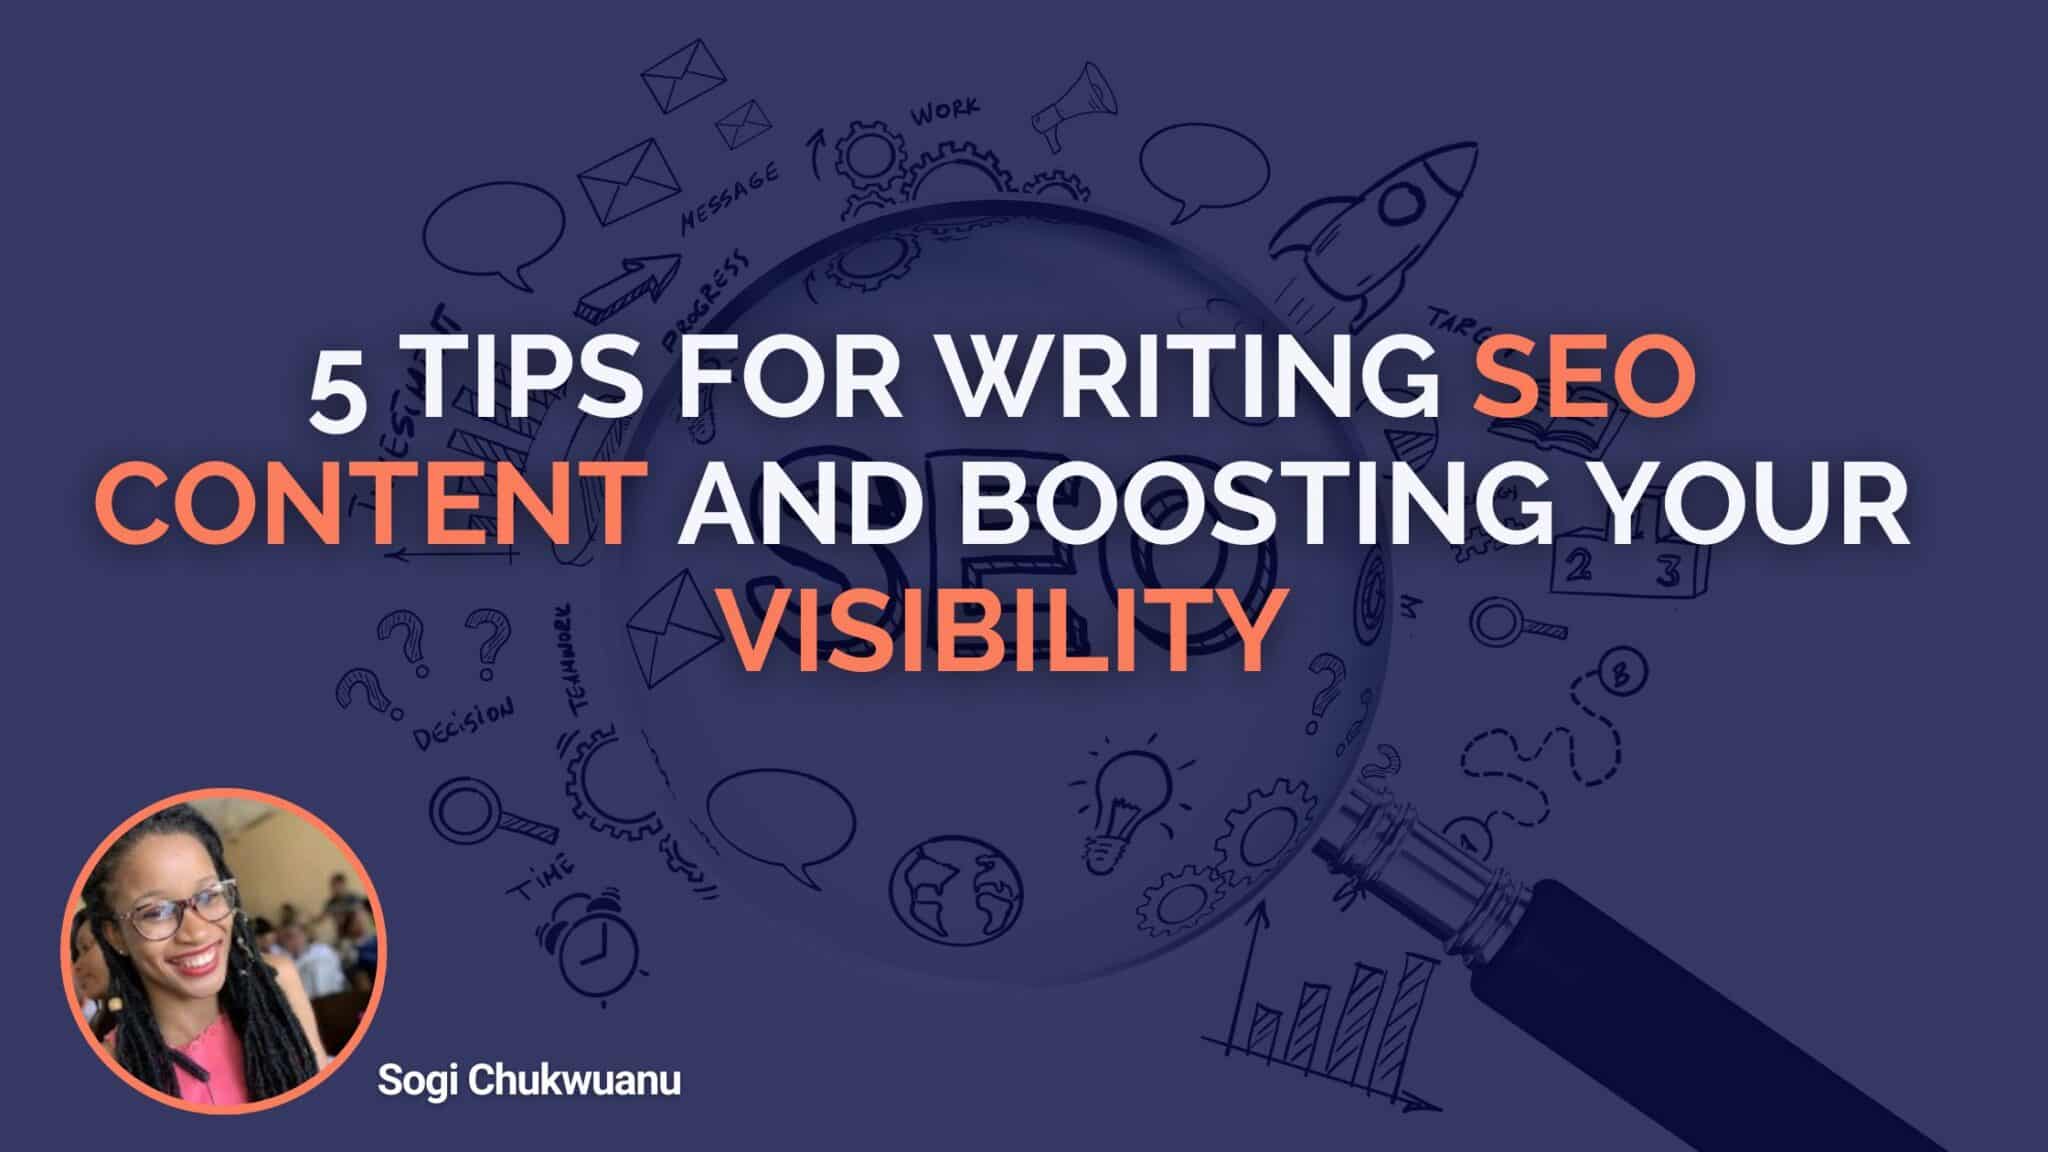 5 Tips For Writing SEO Content And Boosting Your Visibility